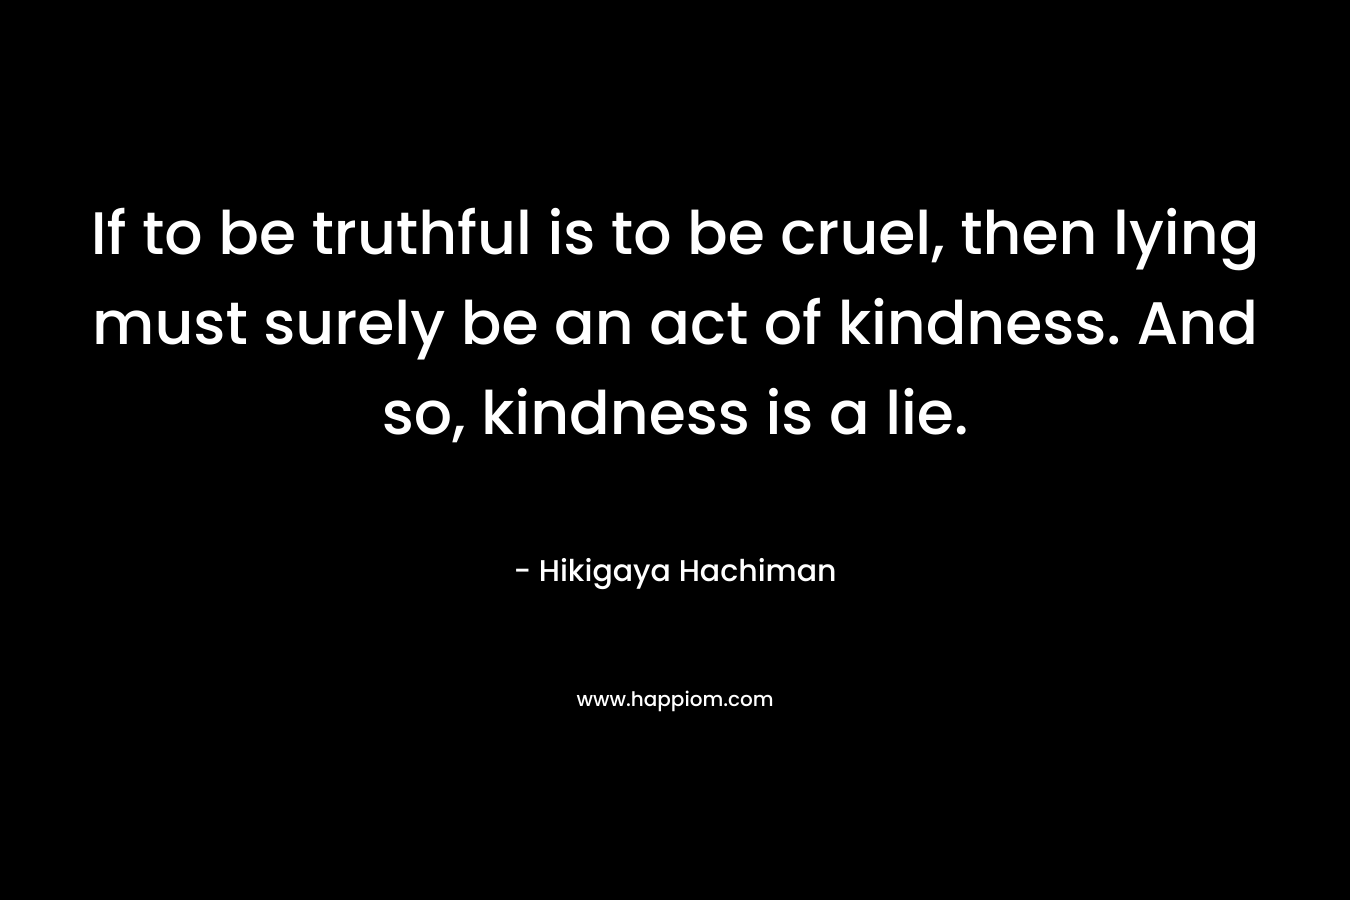 If to be truthful is to be cruel, then lying must surely be an act of kindness. And so, kindness is a lie.